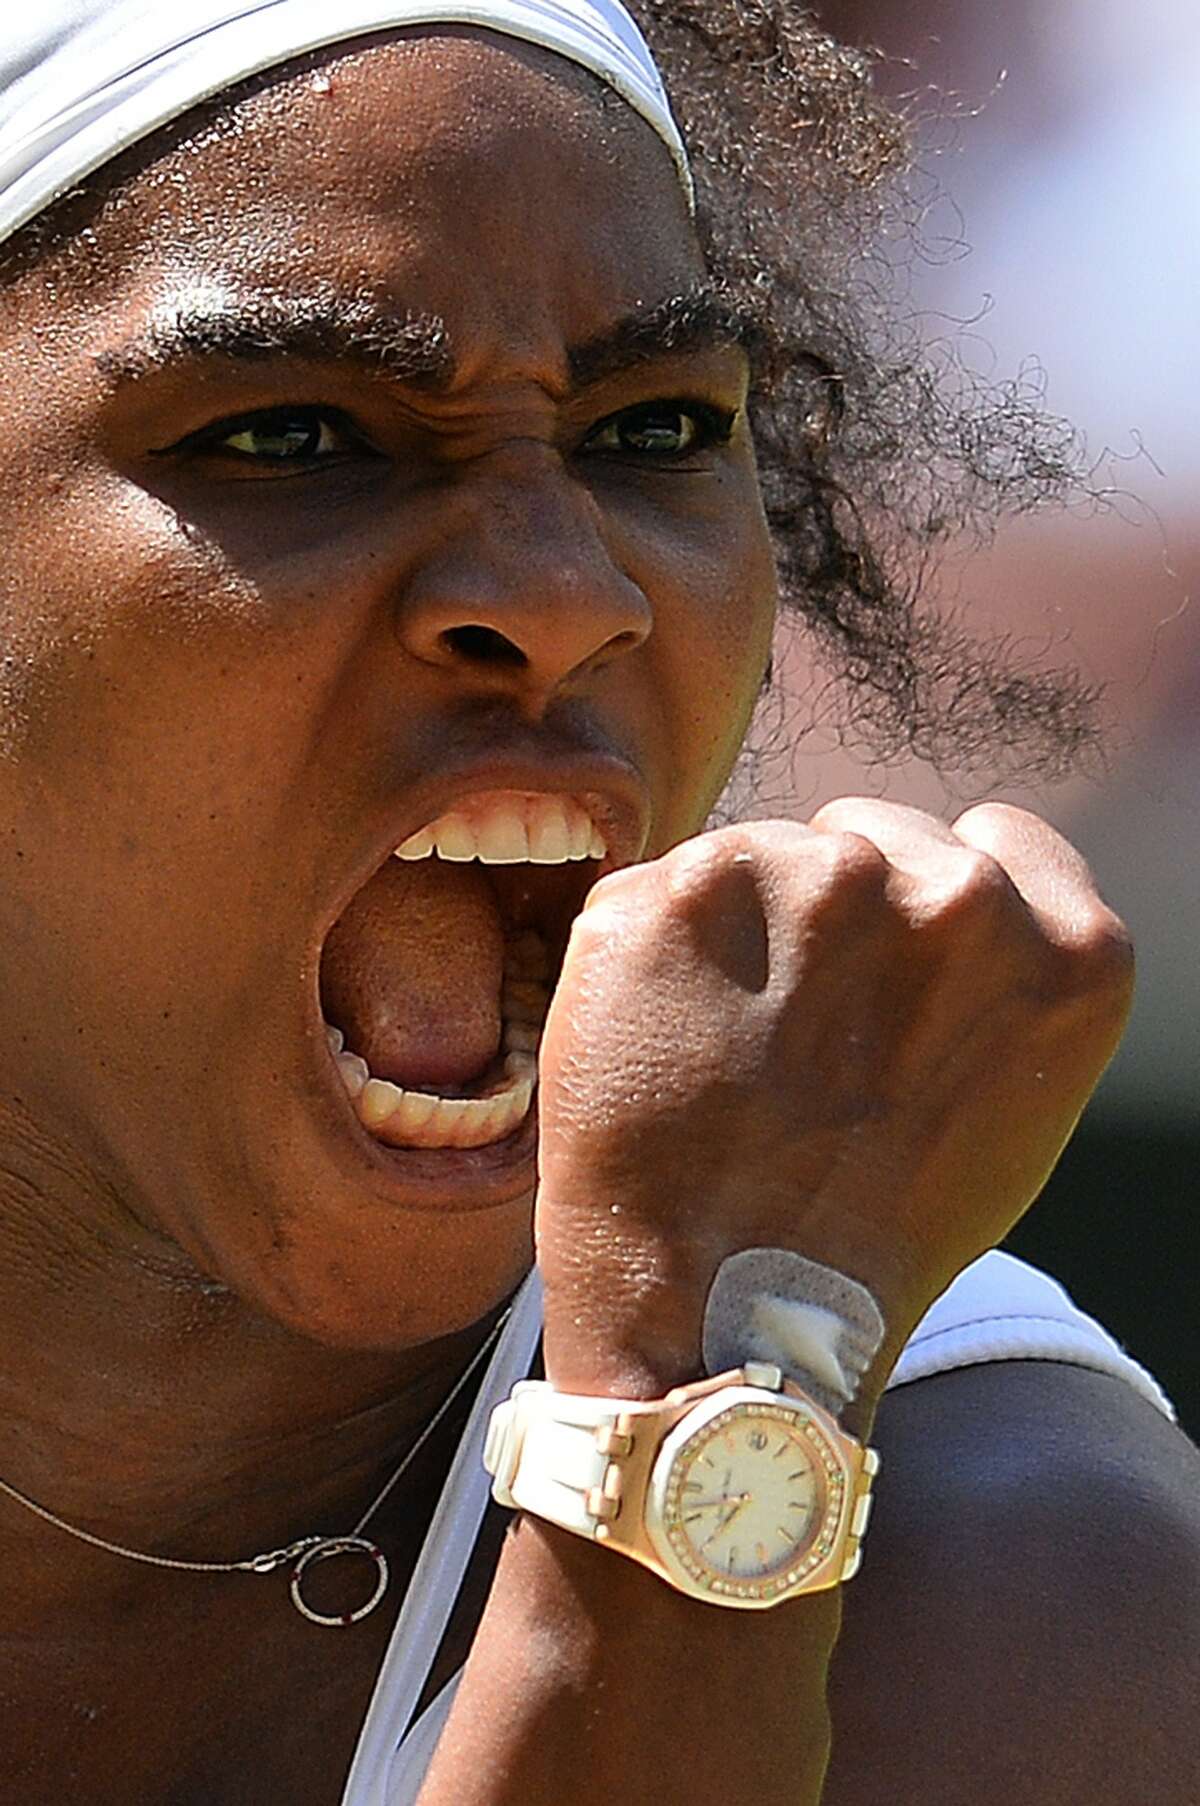 Serena Williams, 33, has been a dominant force on the world tennis stage since the 1990s.﻿